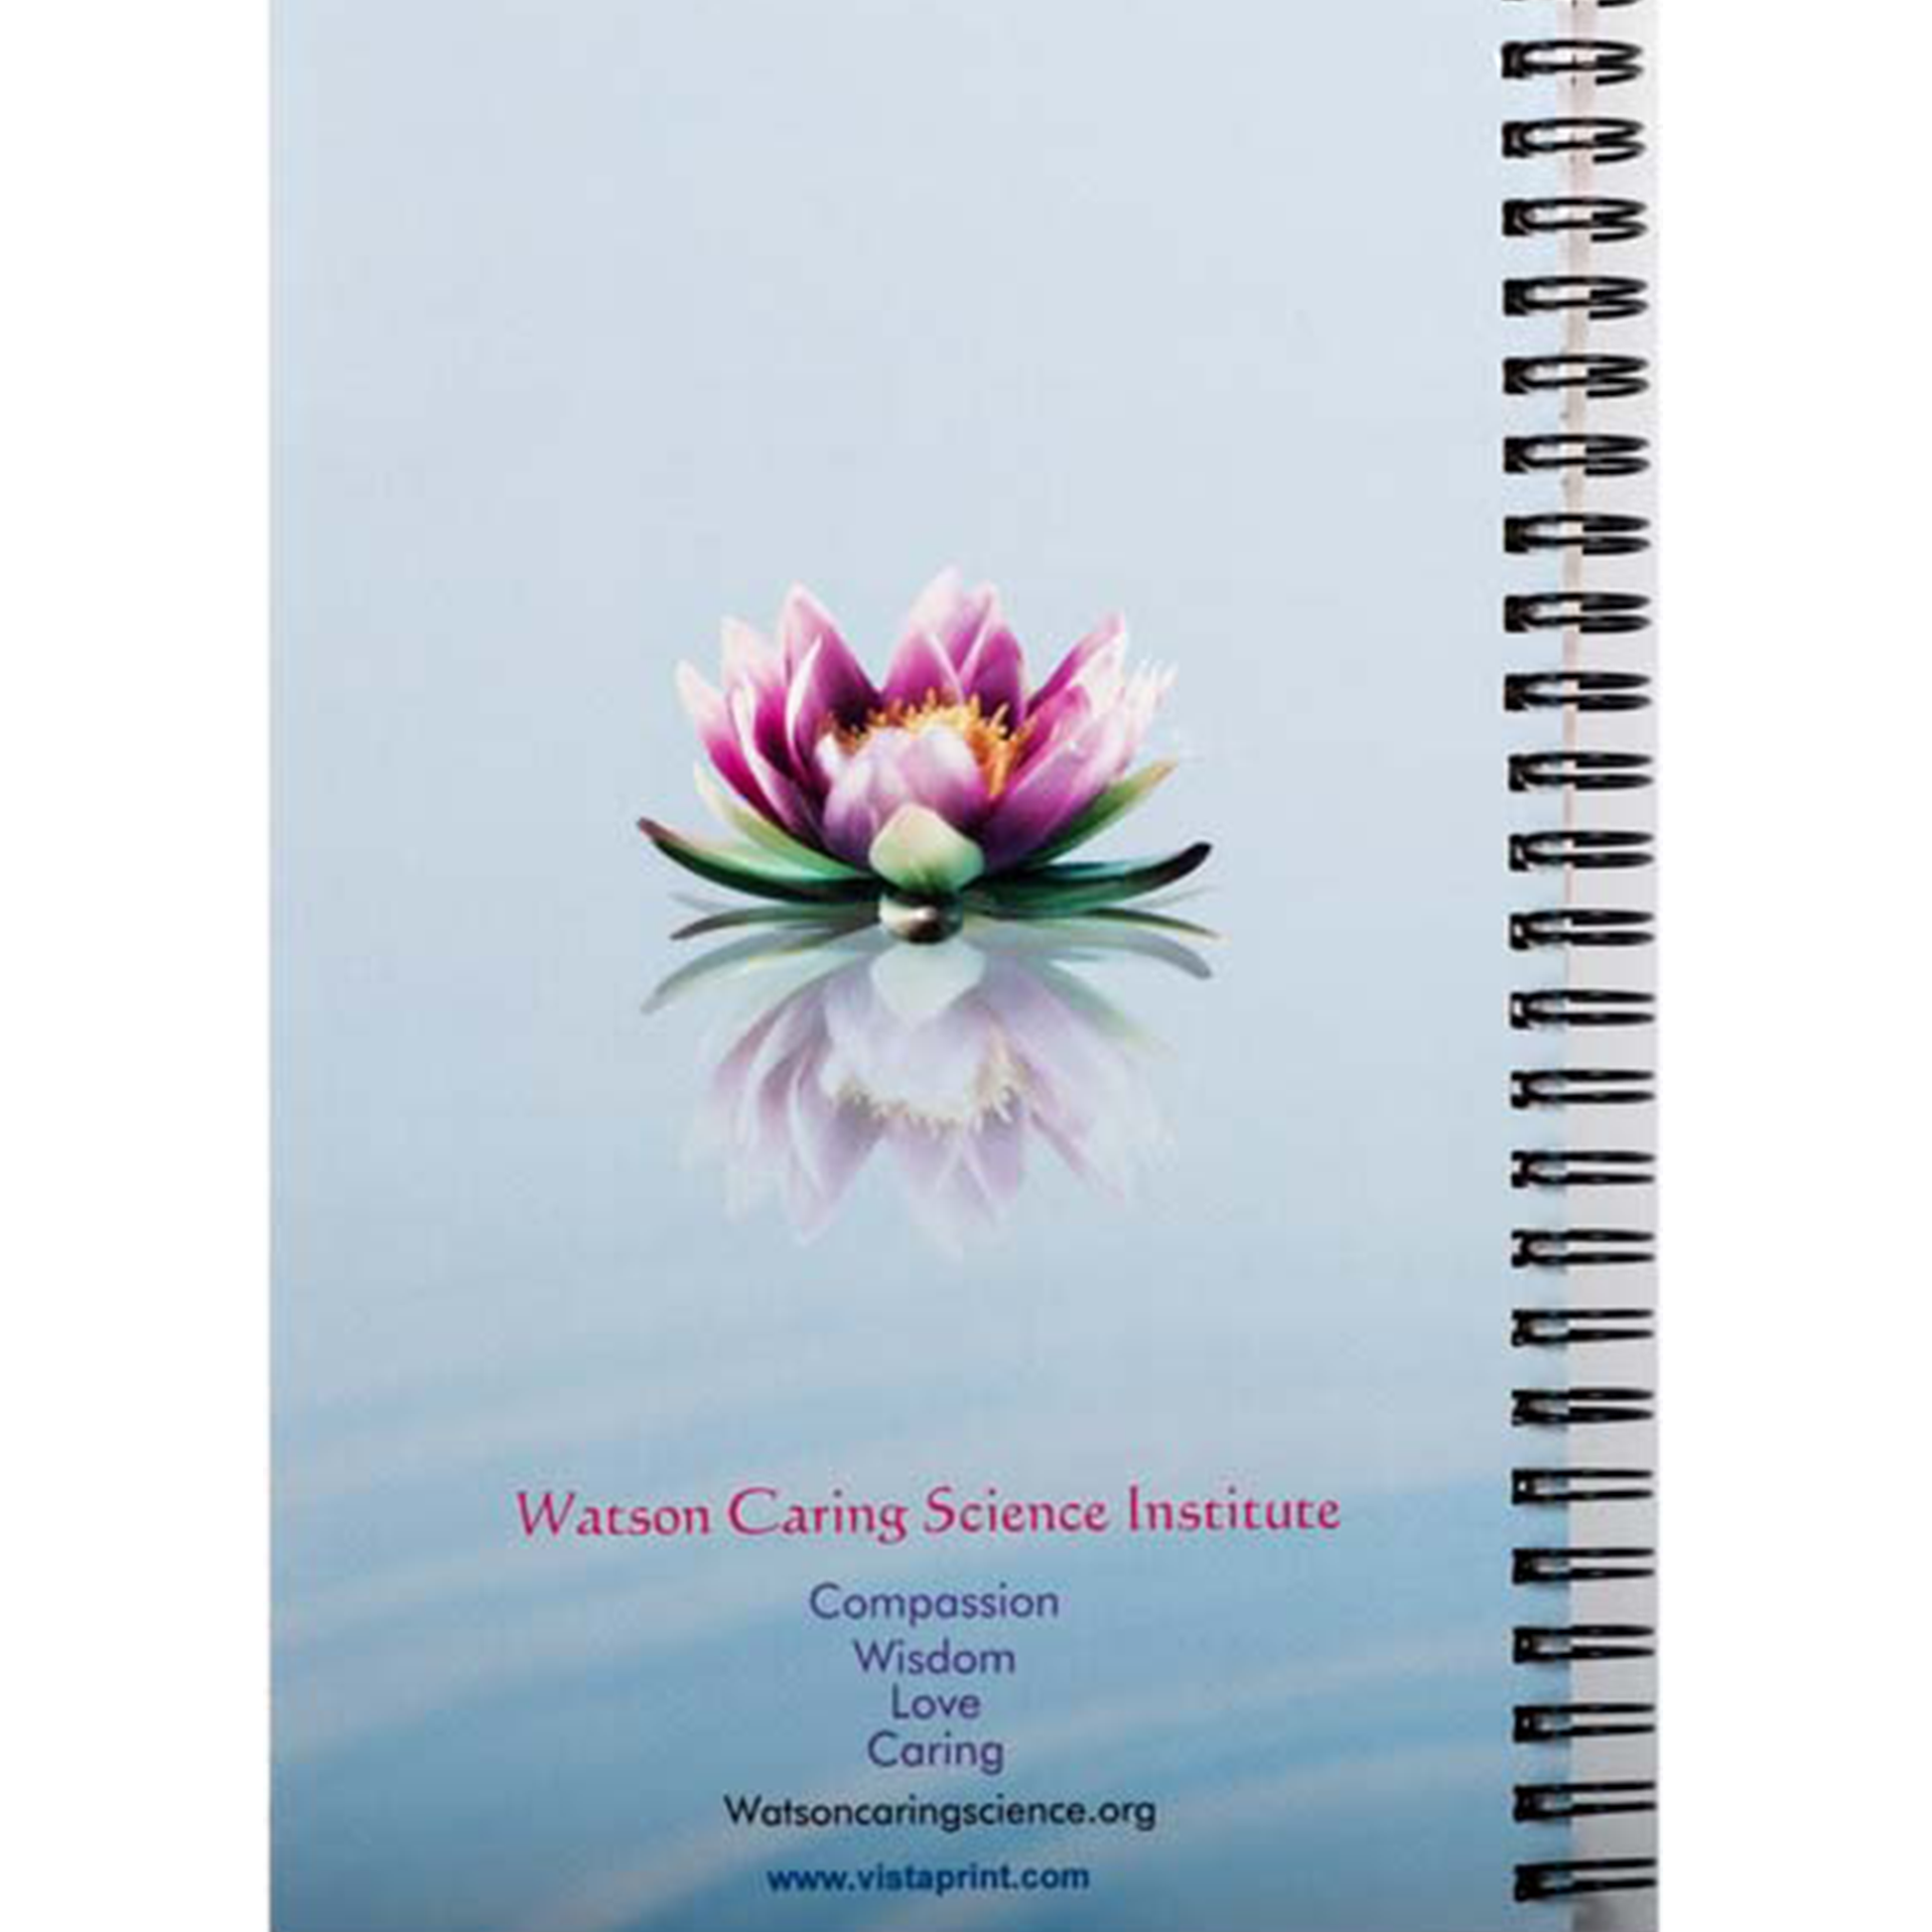 Express your thoughts and reflections on Human Caring with the Caritas Reflection Journals. These spiral-bound notebooks come with lined paper and are perfect for personal reflections on life or for documenting your experiences with the 10 caritas processes. Order now and begin your journey towards self-discovery and healing.